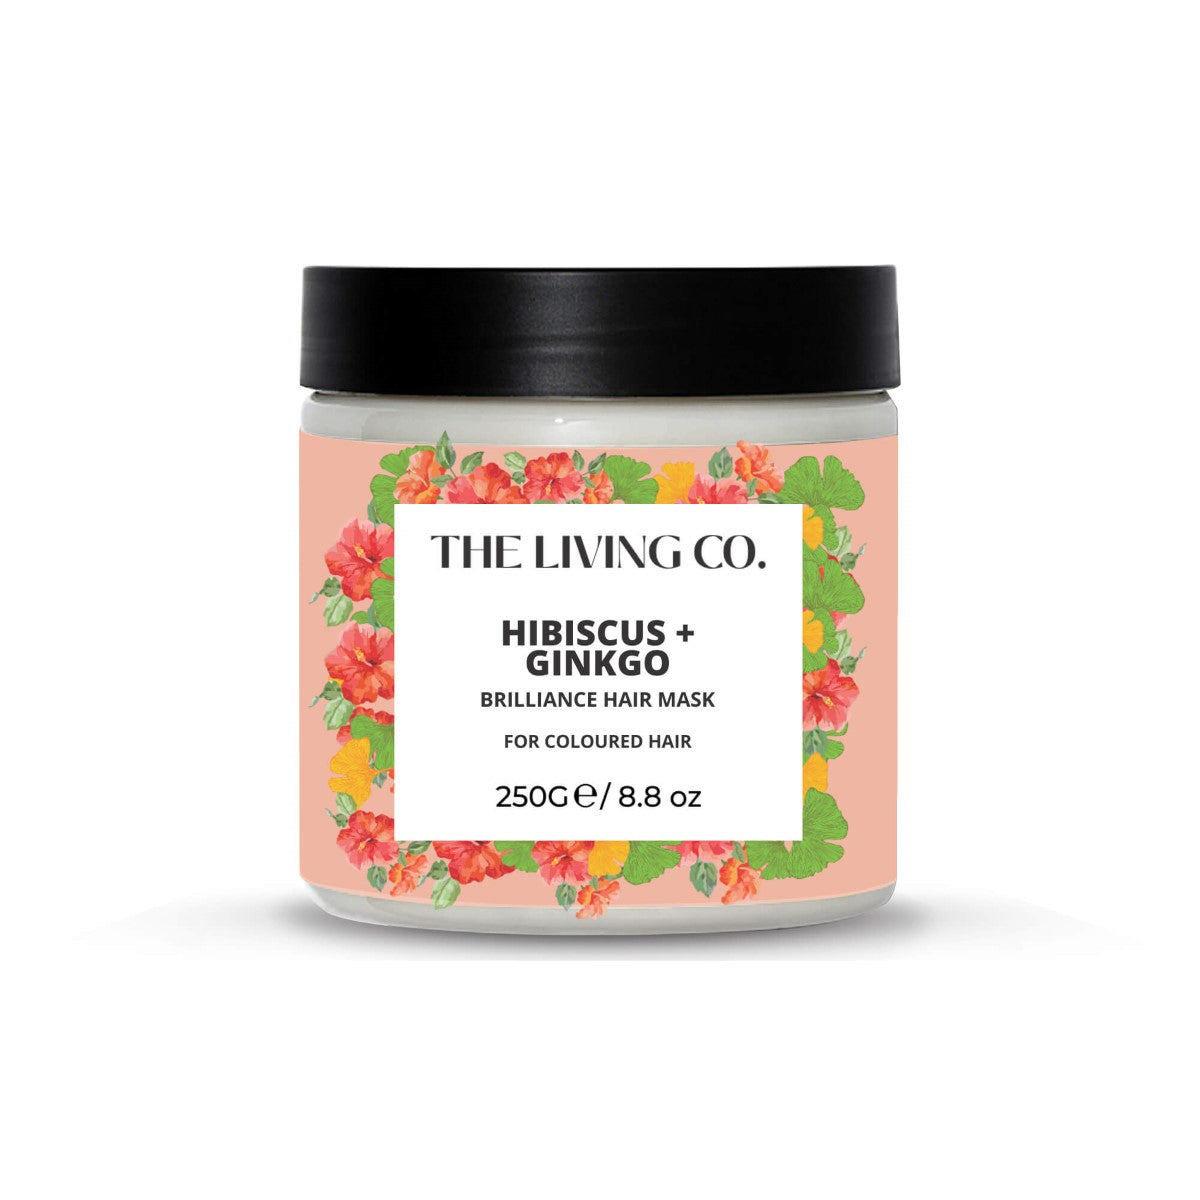 Brilliance Hair Mask With Hibiscus + Ginkgo